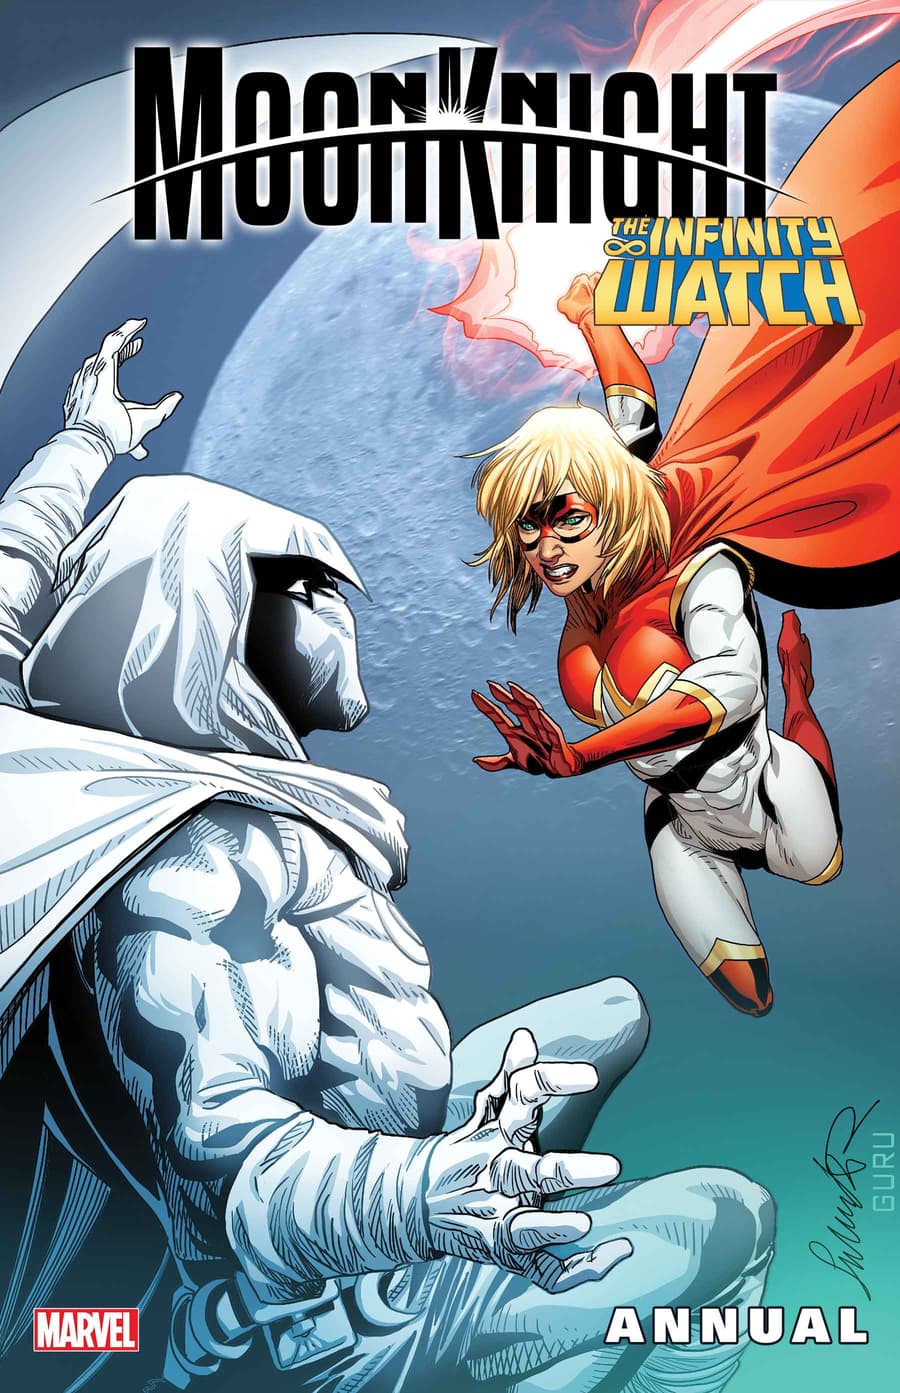 MOON KNIGHT ANNUAL #1 cover by Salvador Larroca